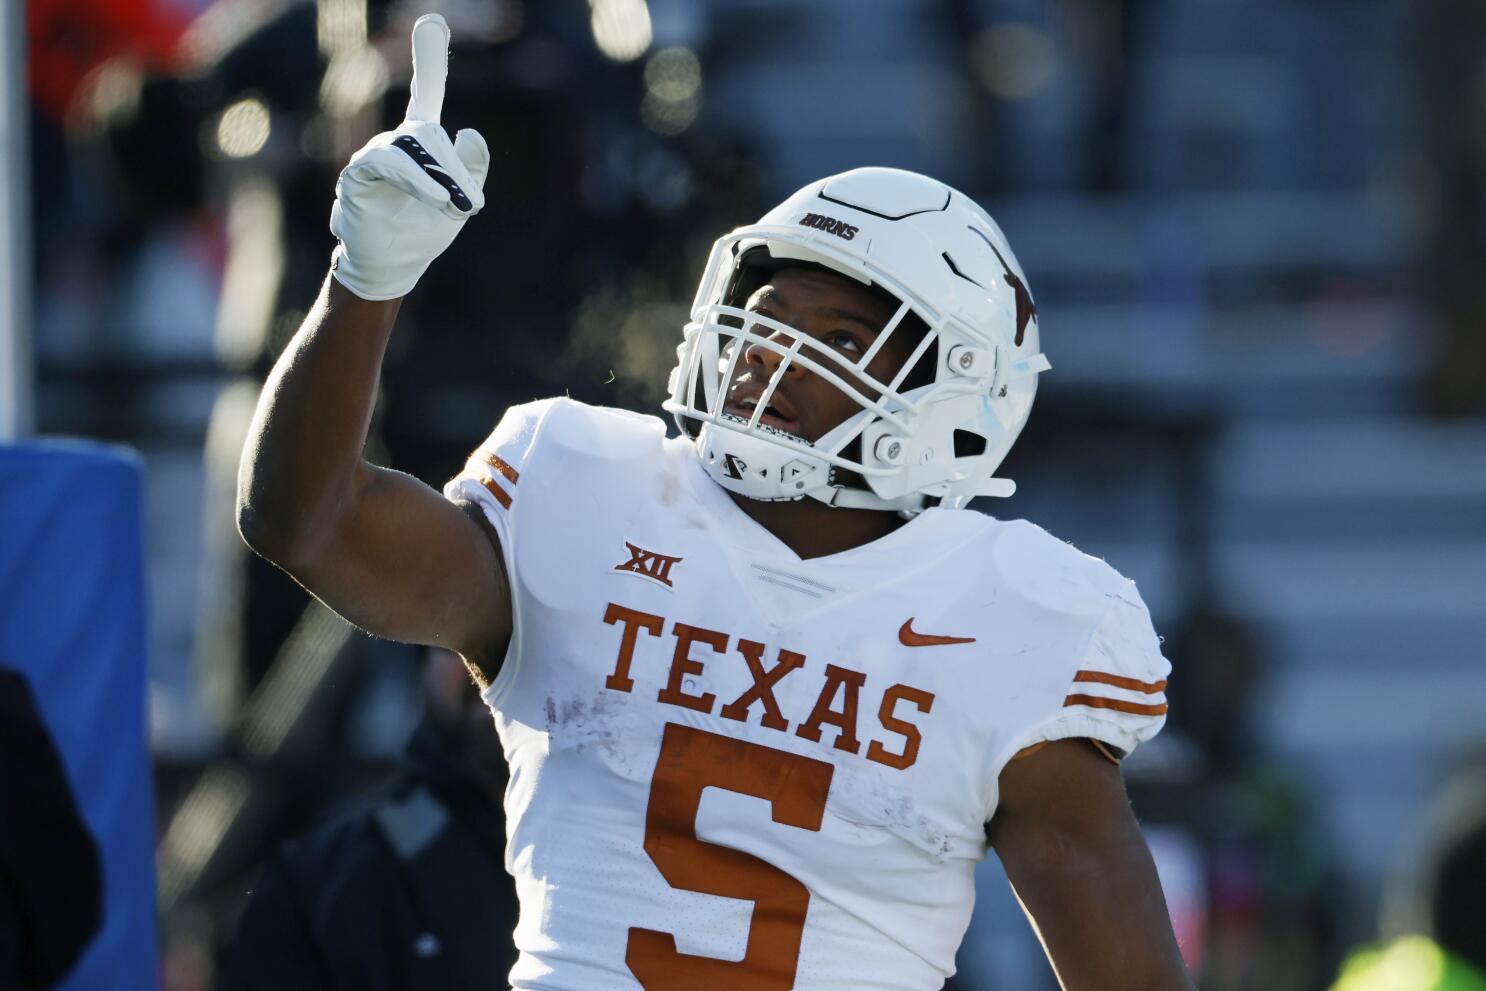 NFL Draft prospects 2022: The top 10 running backs, ranked from